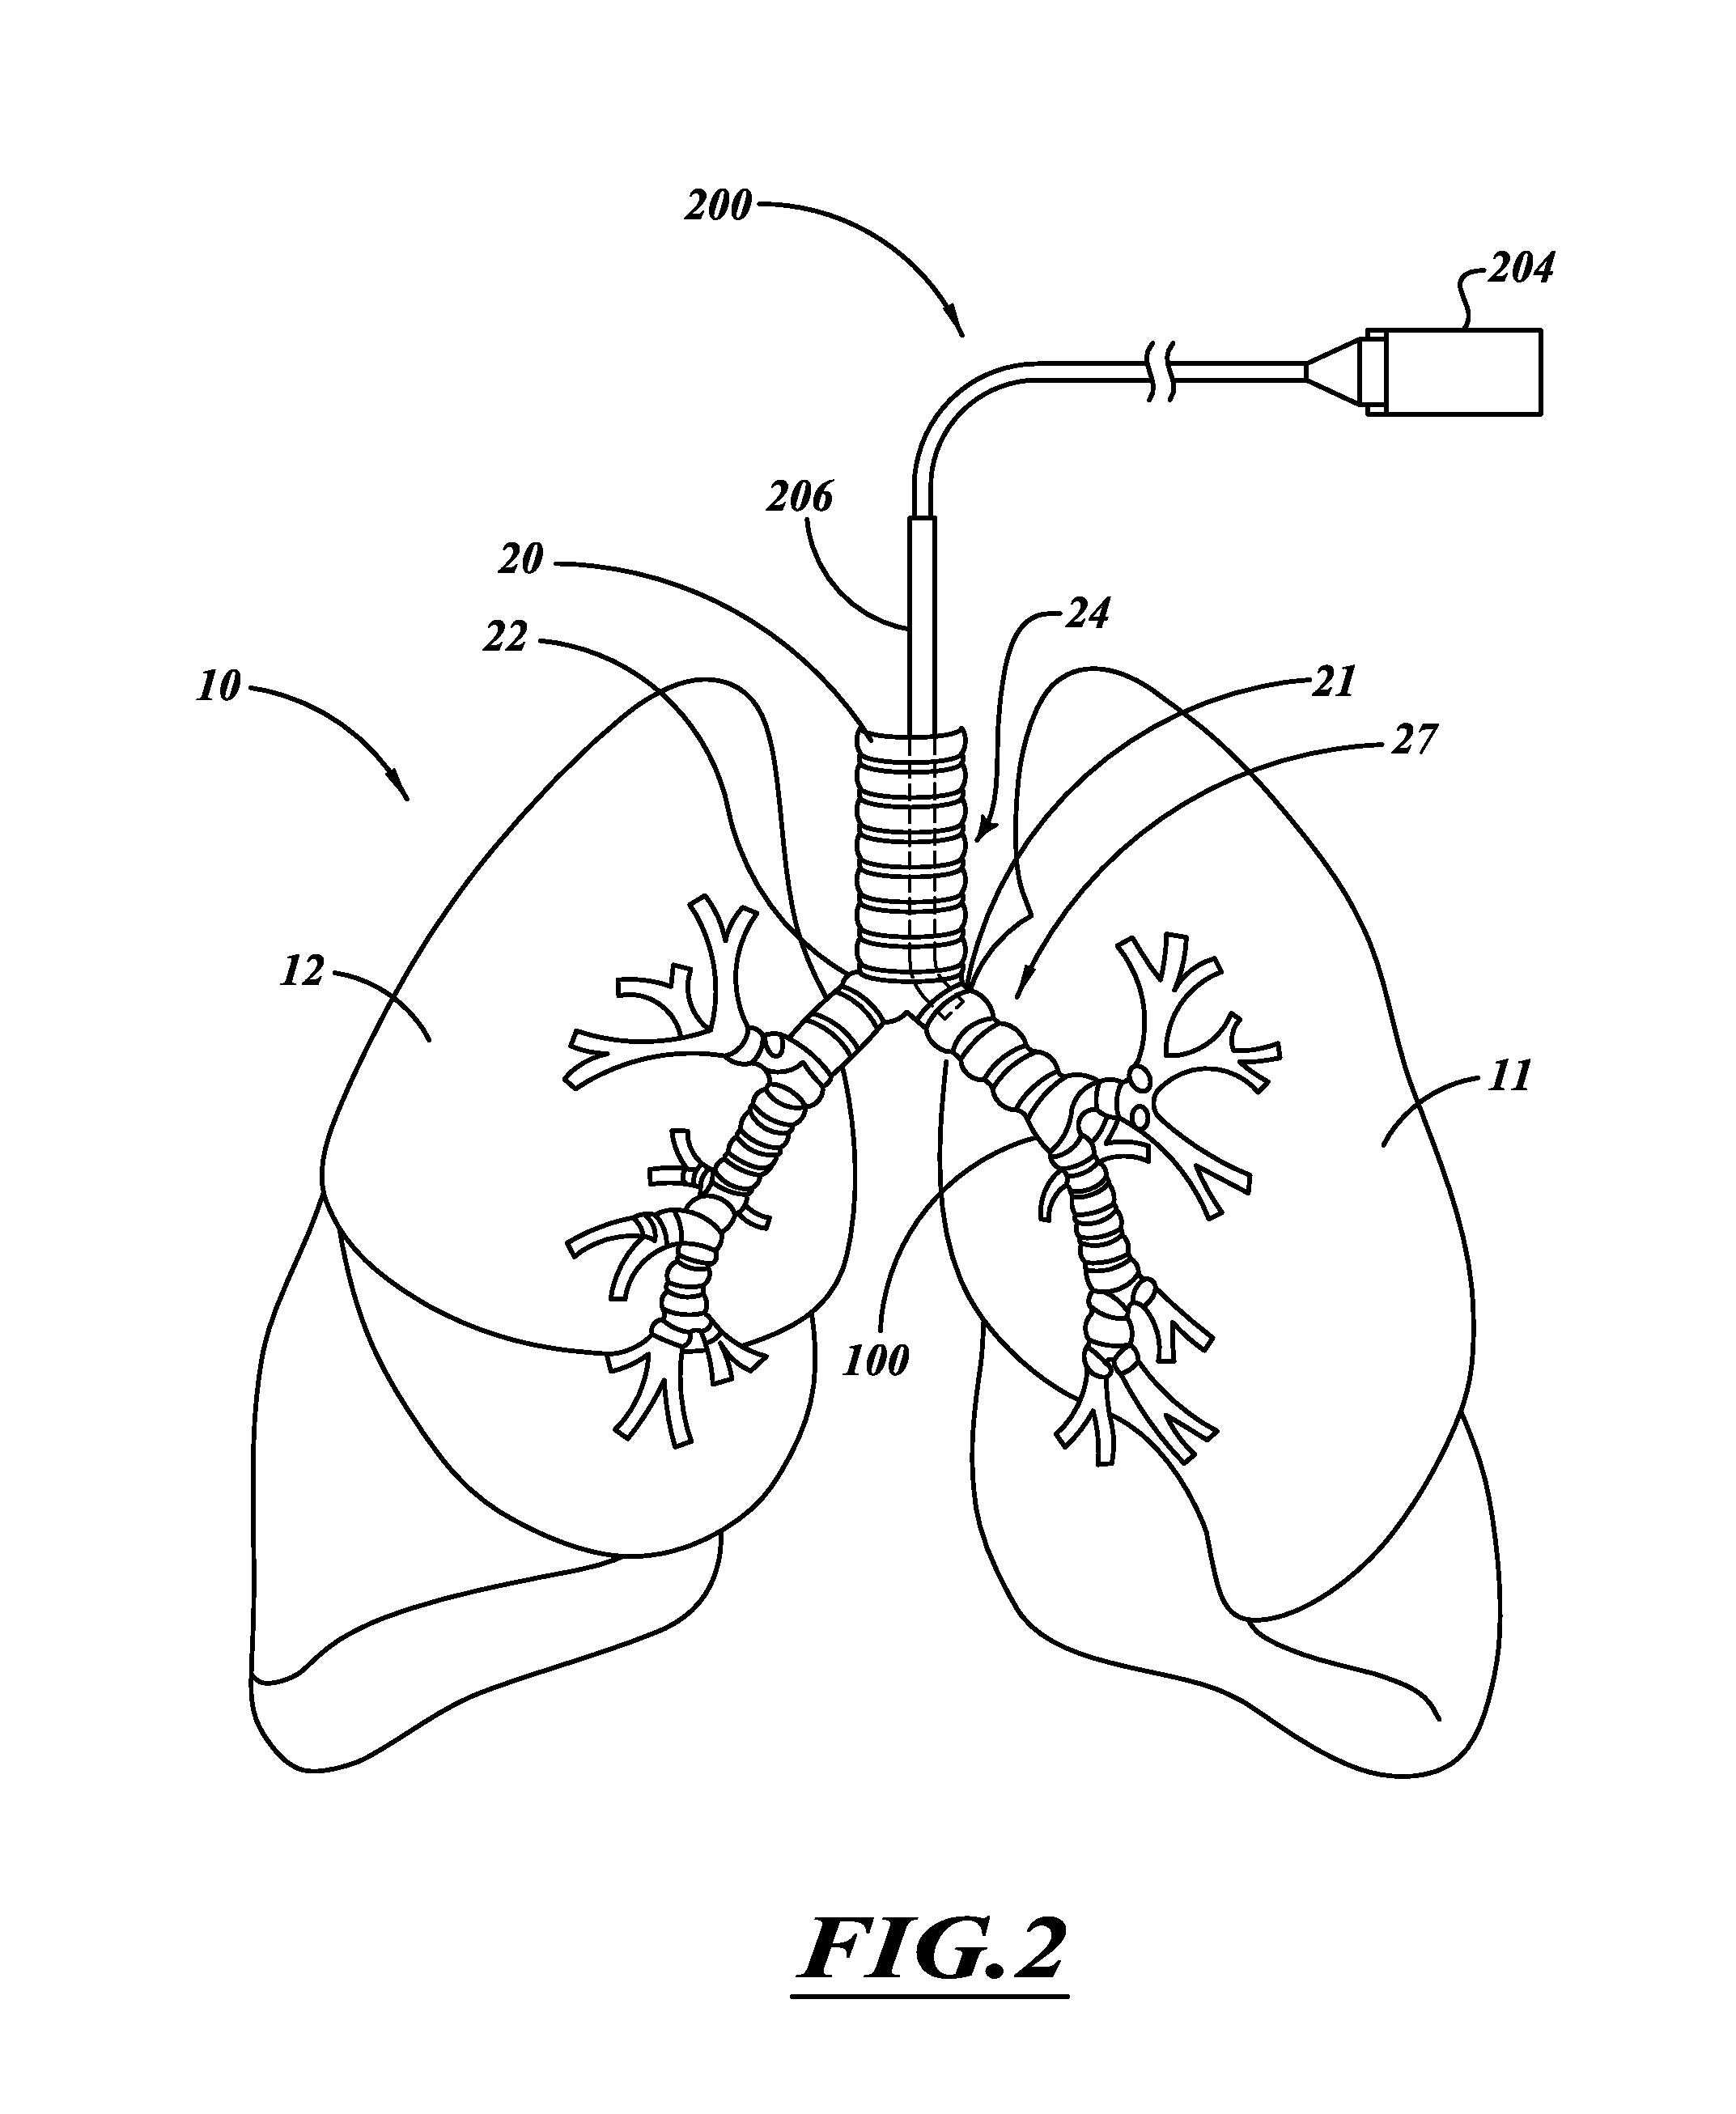 Apparatus for injuring nerve tissue